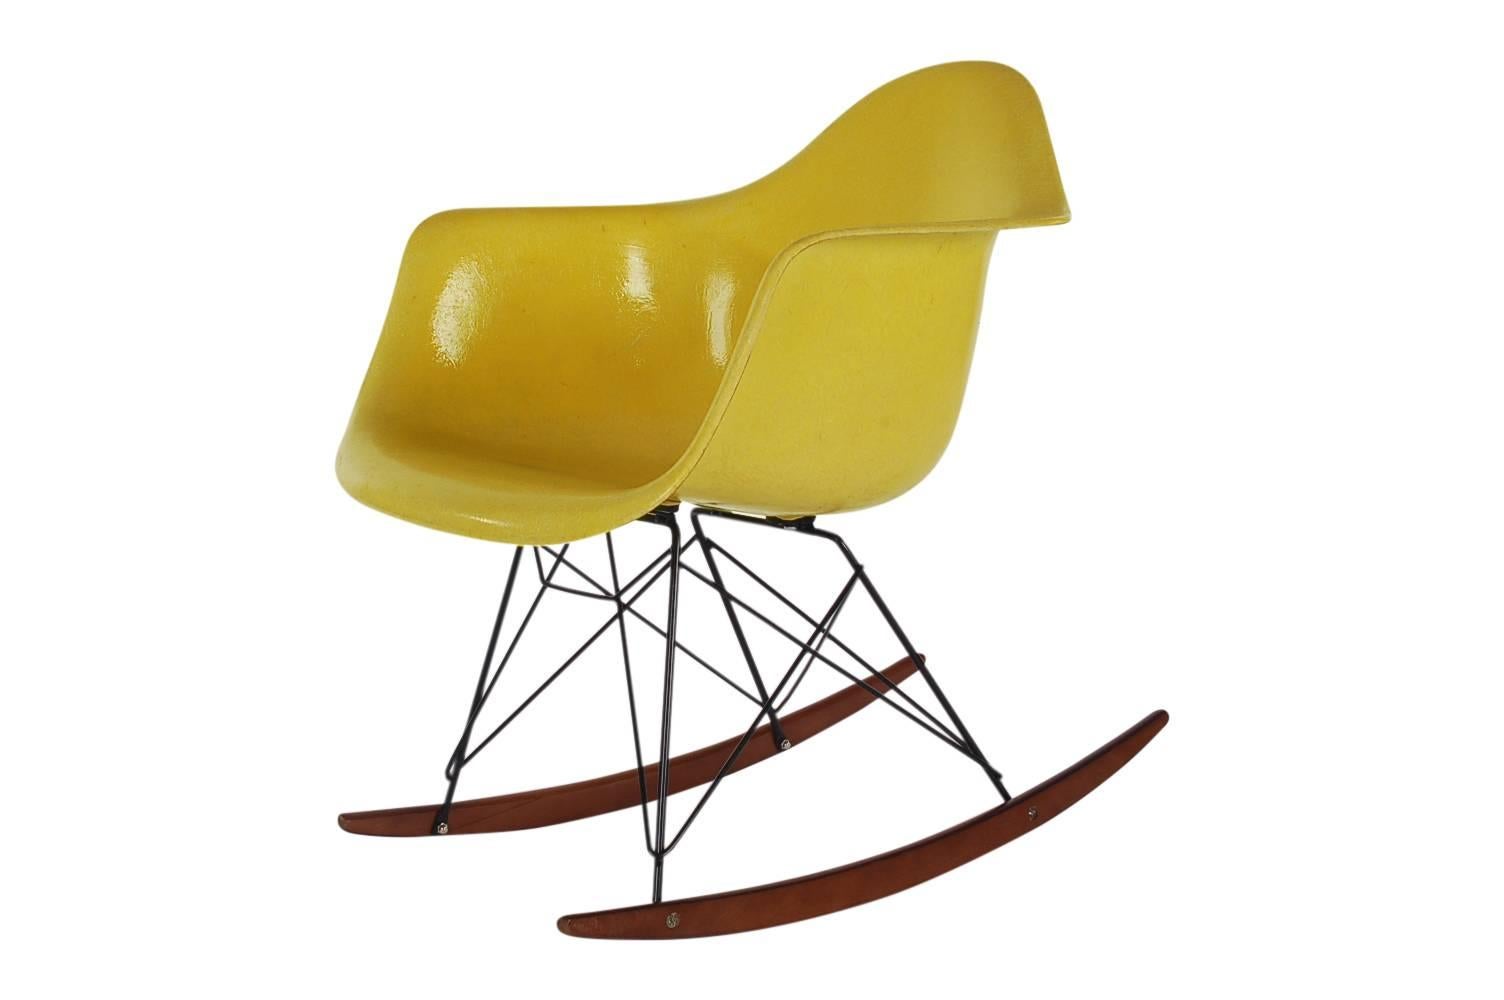 Here we have an iconic design Classic from the Mid-Century Modern period. This vintage fiberglass shell chair was designed by Charles Eames and produced by Herman Miller circa 1972. The chair seat is vintage and the rocking chair base is a newer